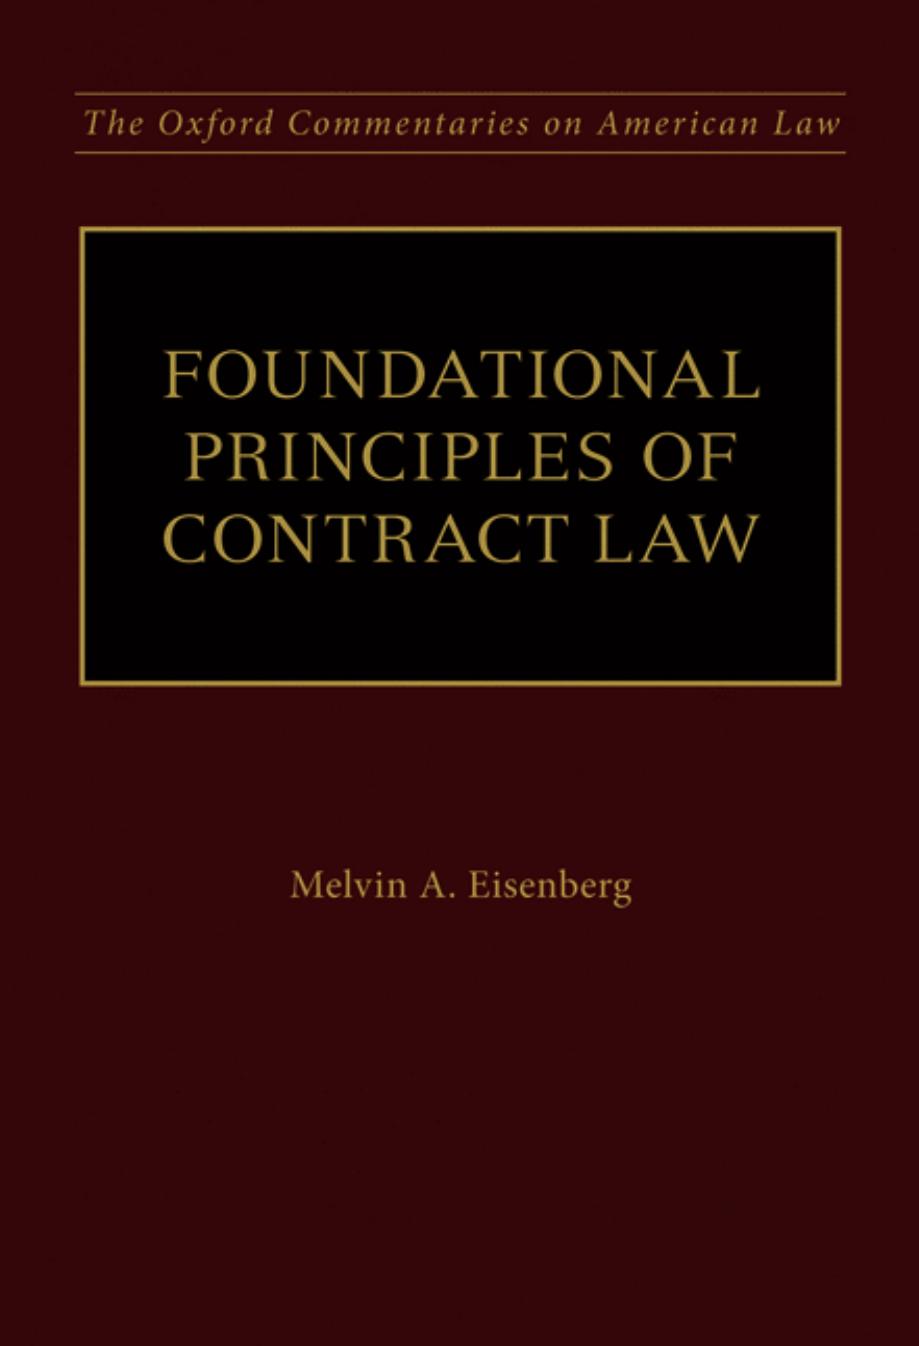 FOUNDATIONAL PRINCIPLES OF CONTRACT LAW